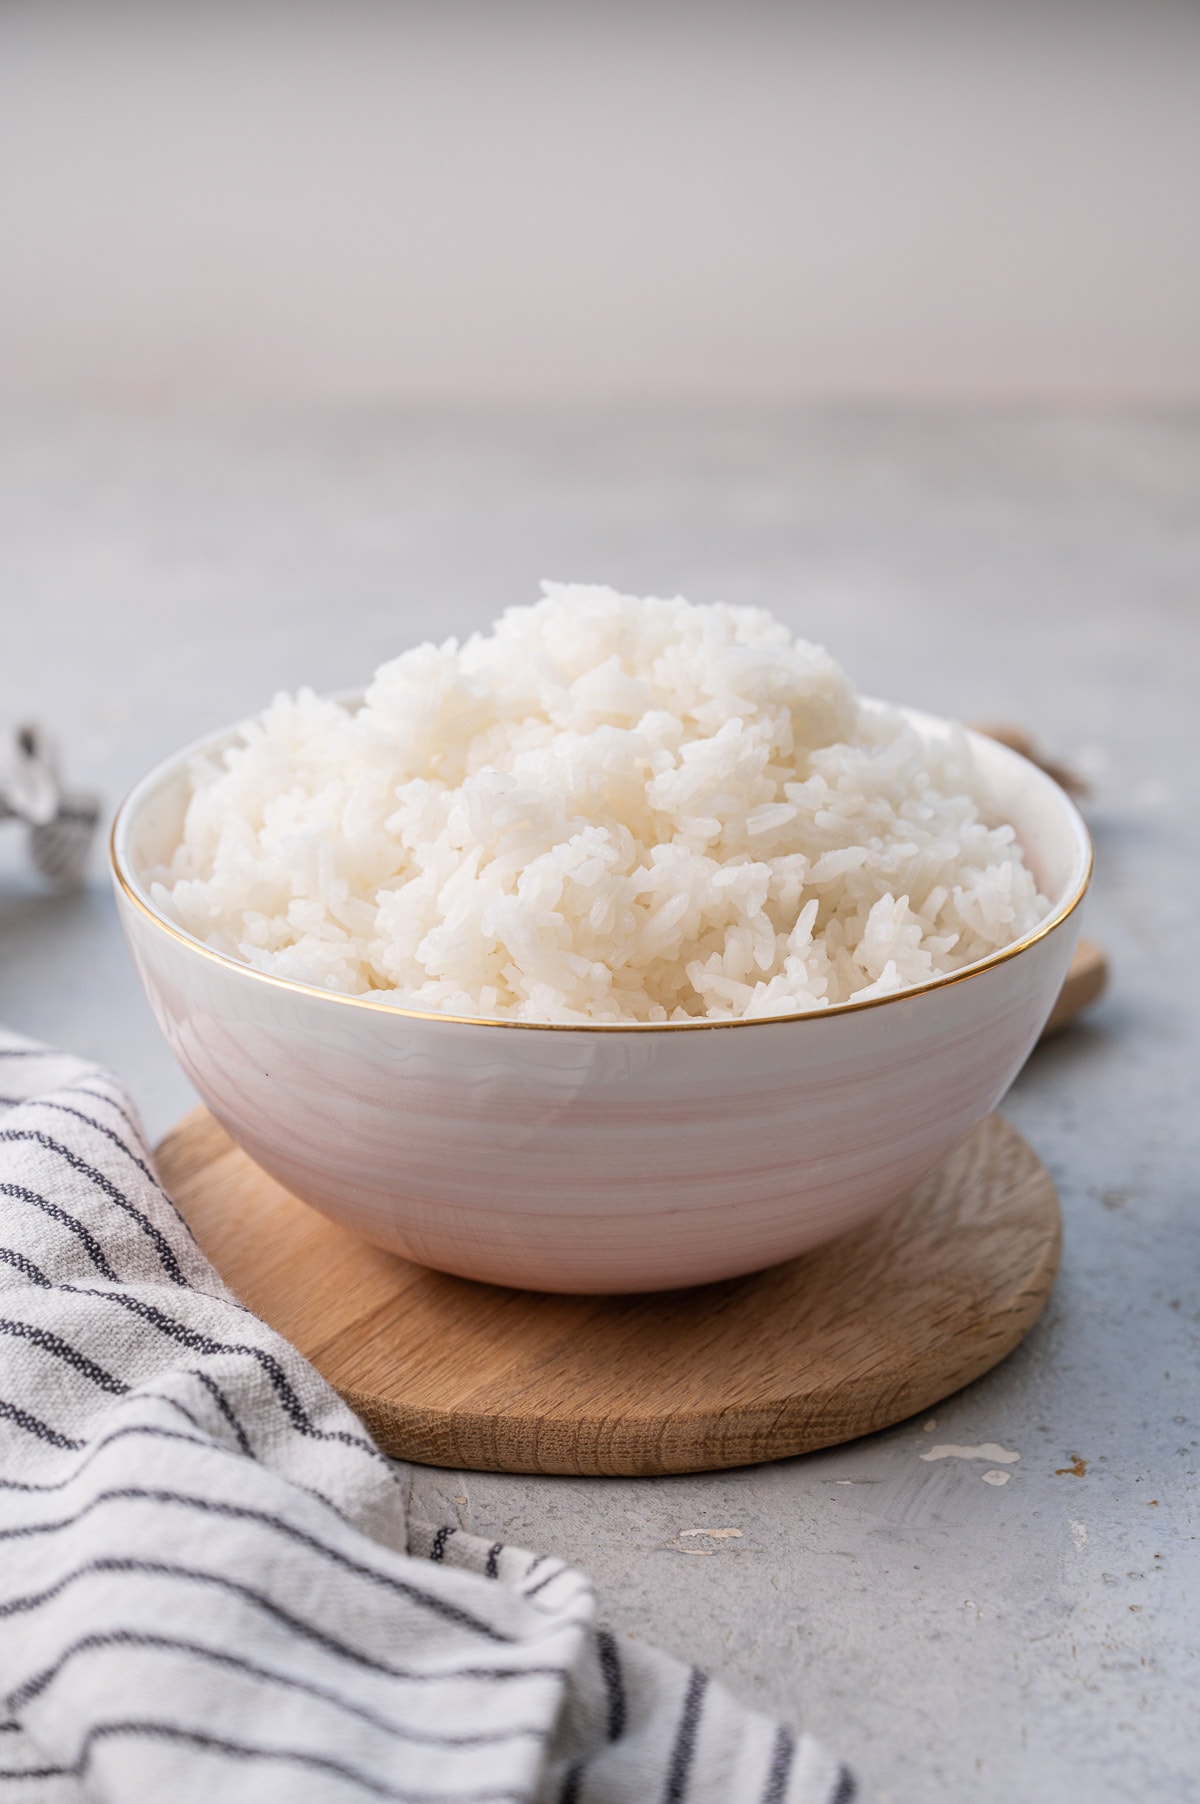 https://www.everyday-delicious.com/wp-content/uploads/2022/05/jasmin-rice-everyday-delicious-2.jpg